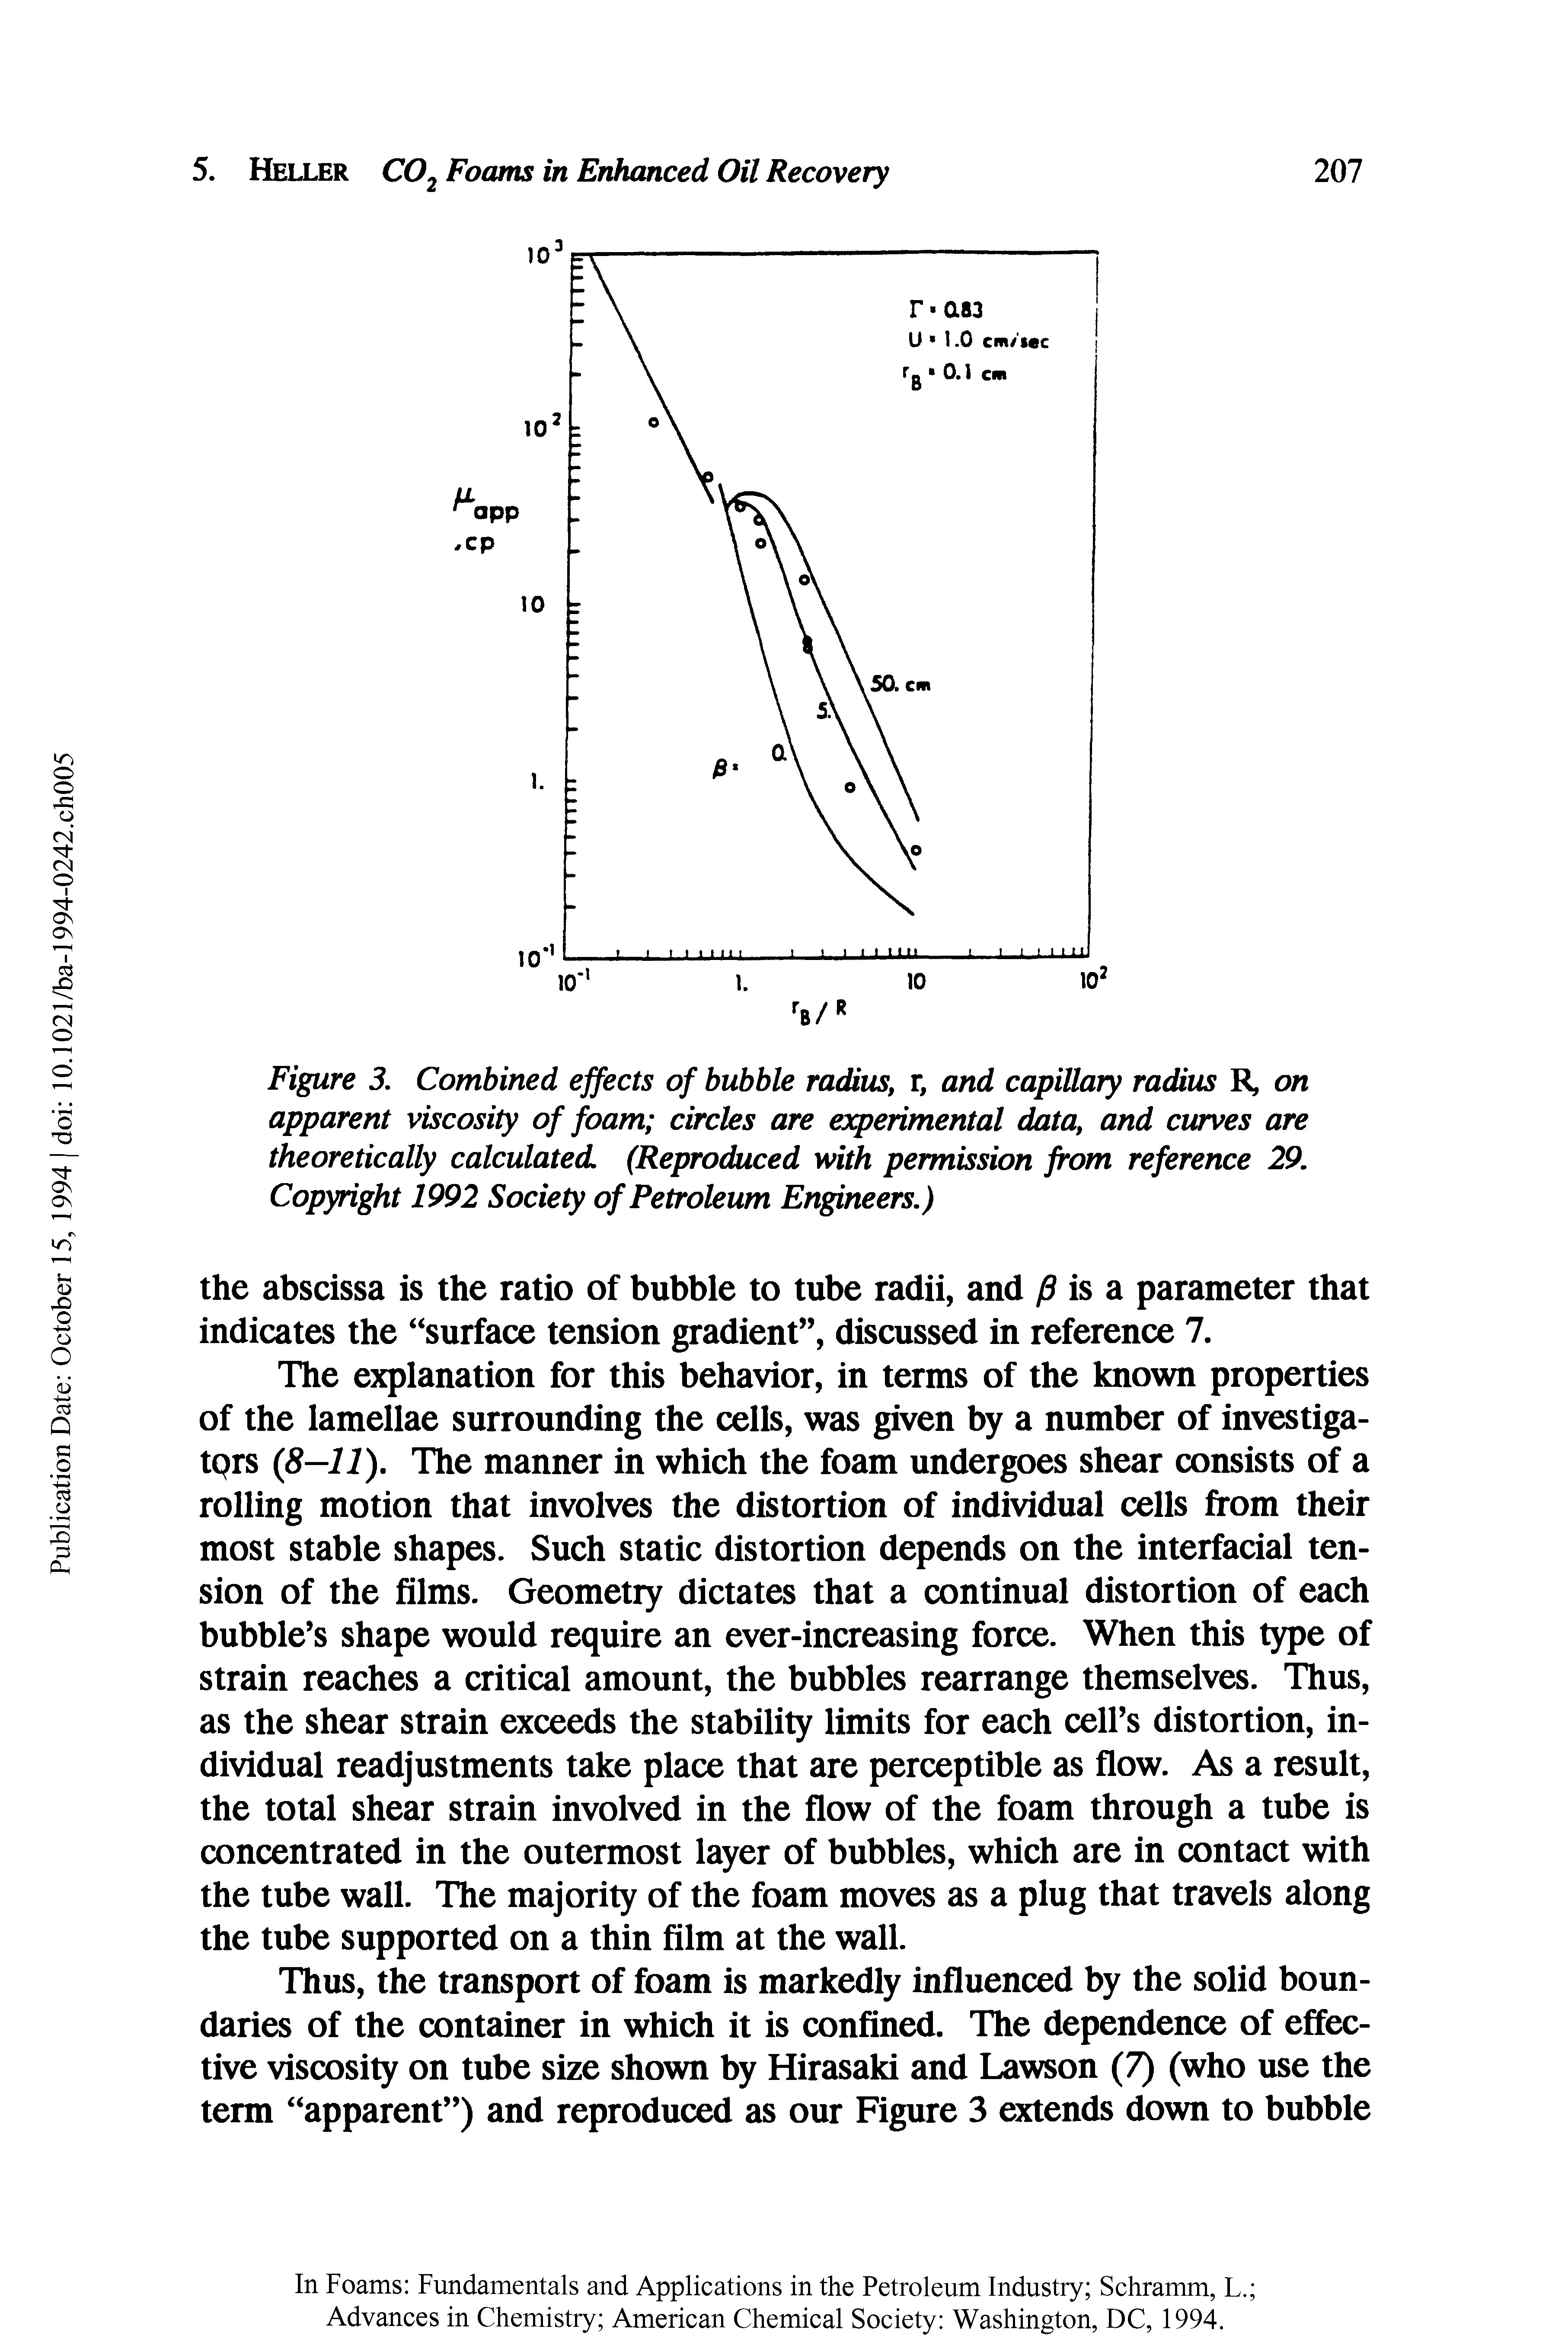 Figure 3. Combined effects of bubble radius, r, and capillary radius R, on apparent viscosity of foam circles are experimental data, and curves are theoretically calculated. (Reproduced with permission from reference 29. Copyright 1992 Society of Petroleum Engineers.)...